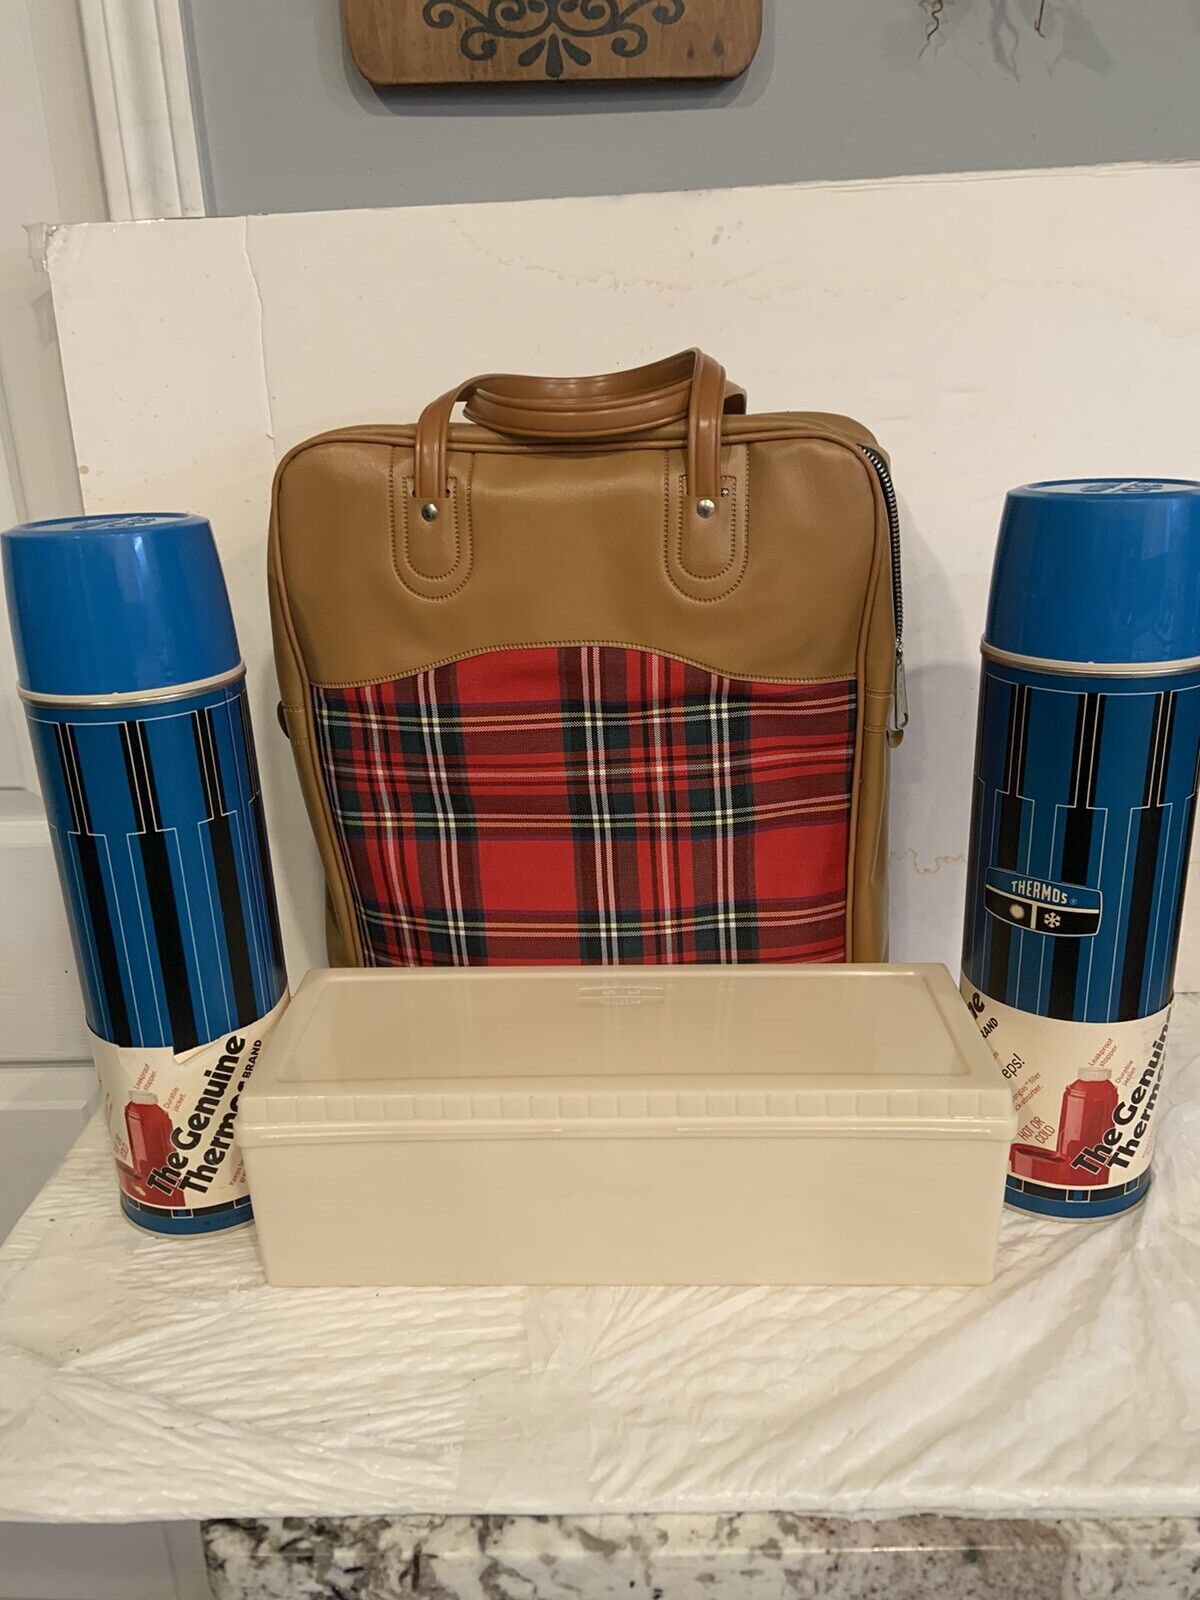 Vntg Thermos Picnic Set King Seeley 1973 Lunchbox 2 Metal Bottles W/Plaid Tote